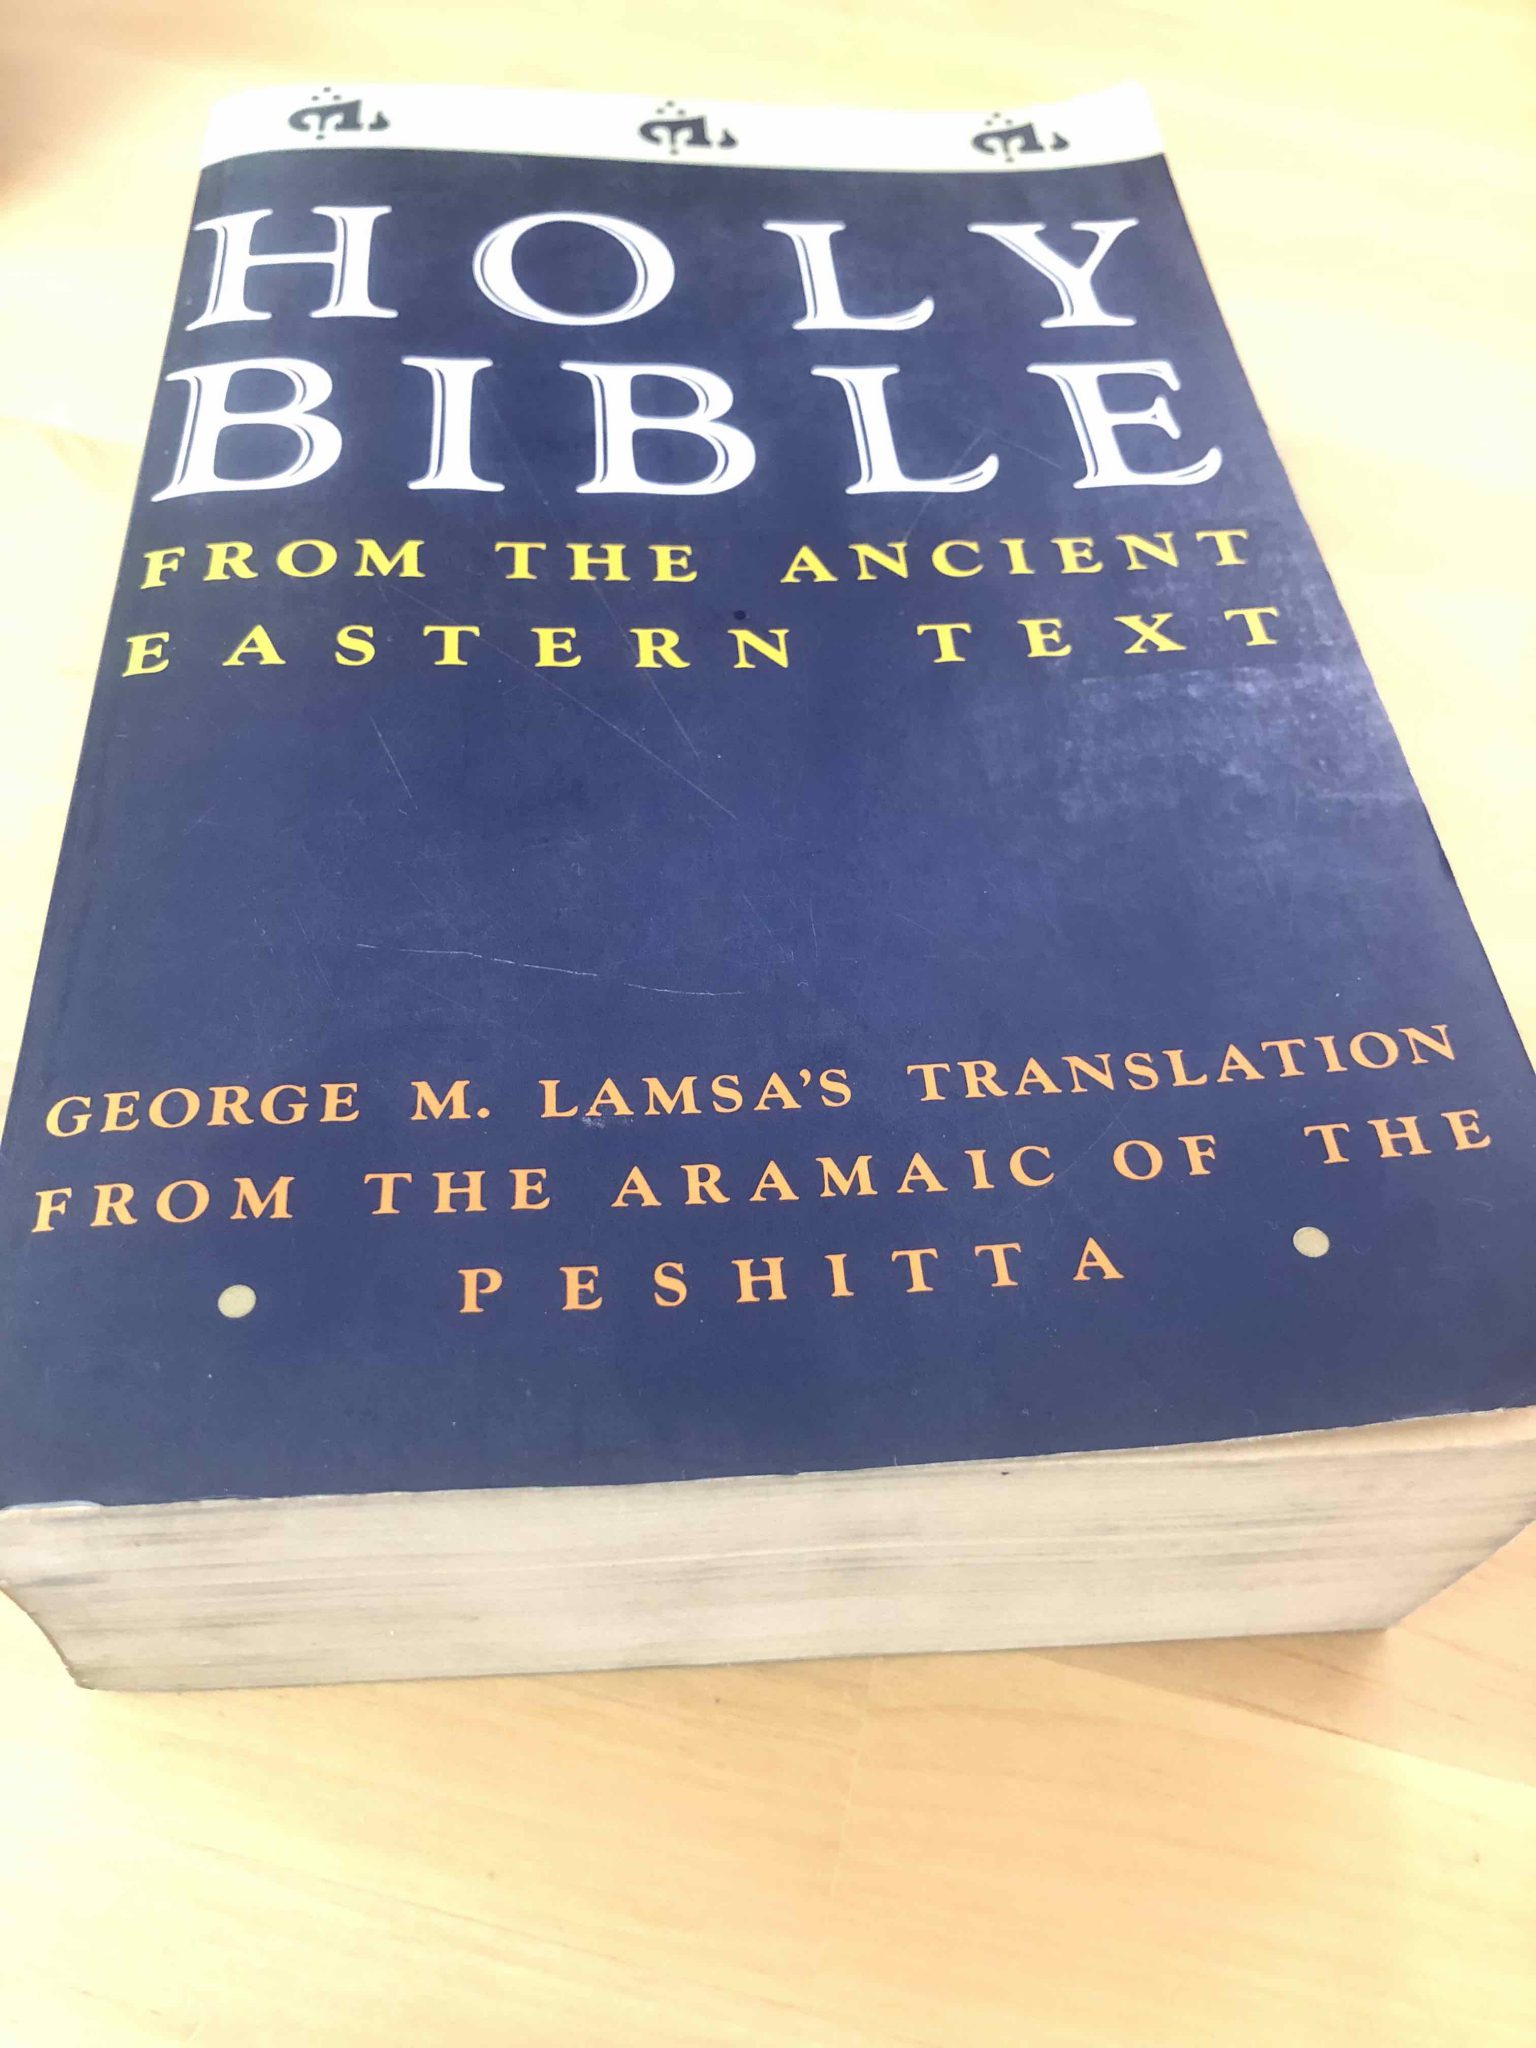 where to get a bible